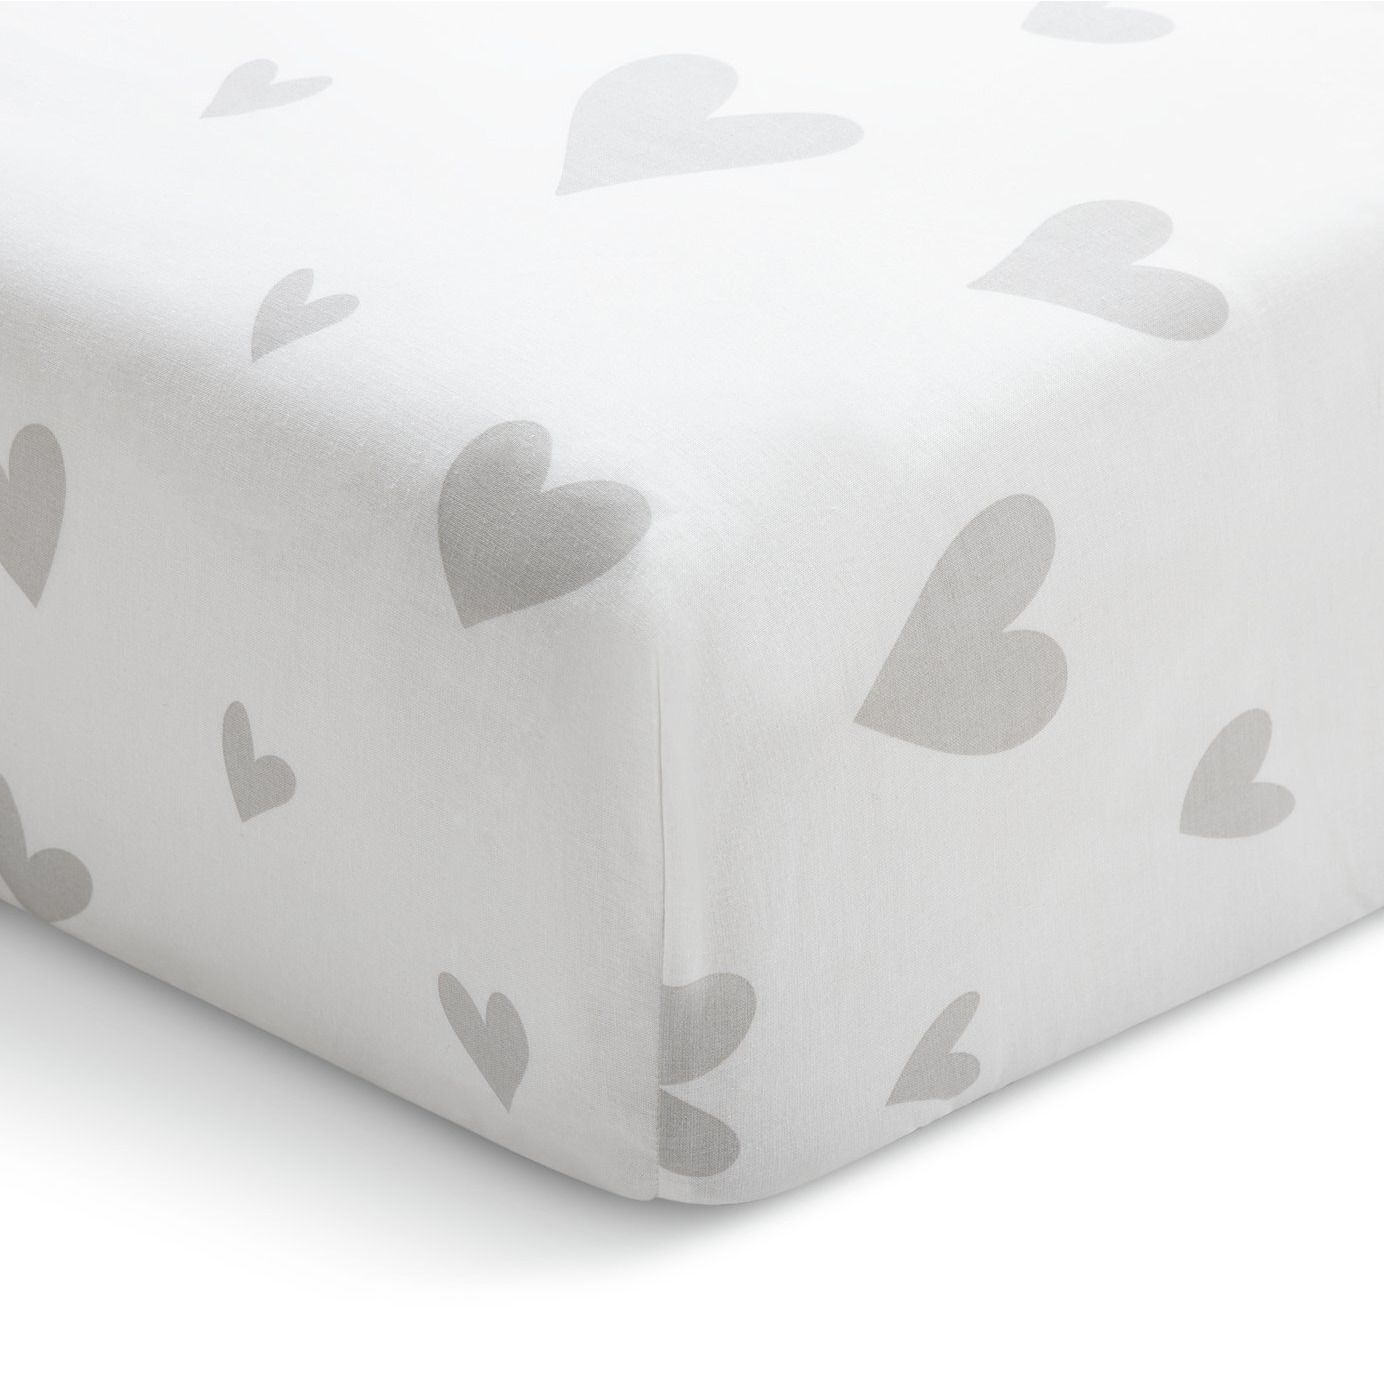 Habitat Hearts Printed White Fitted Sheet - Single